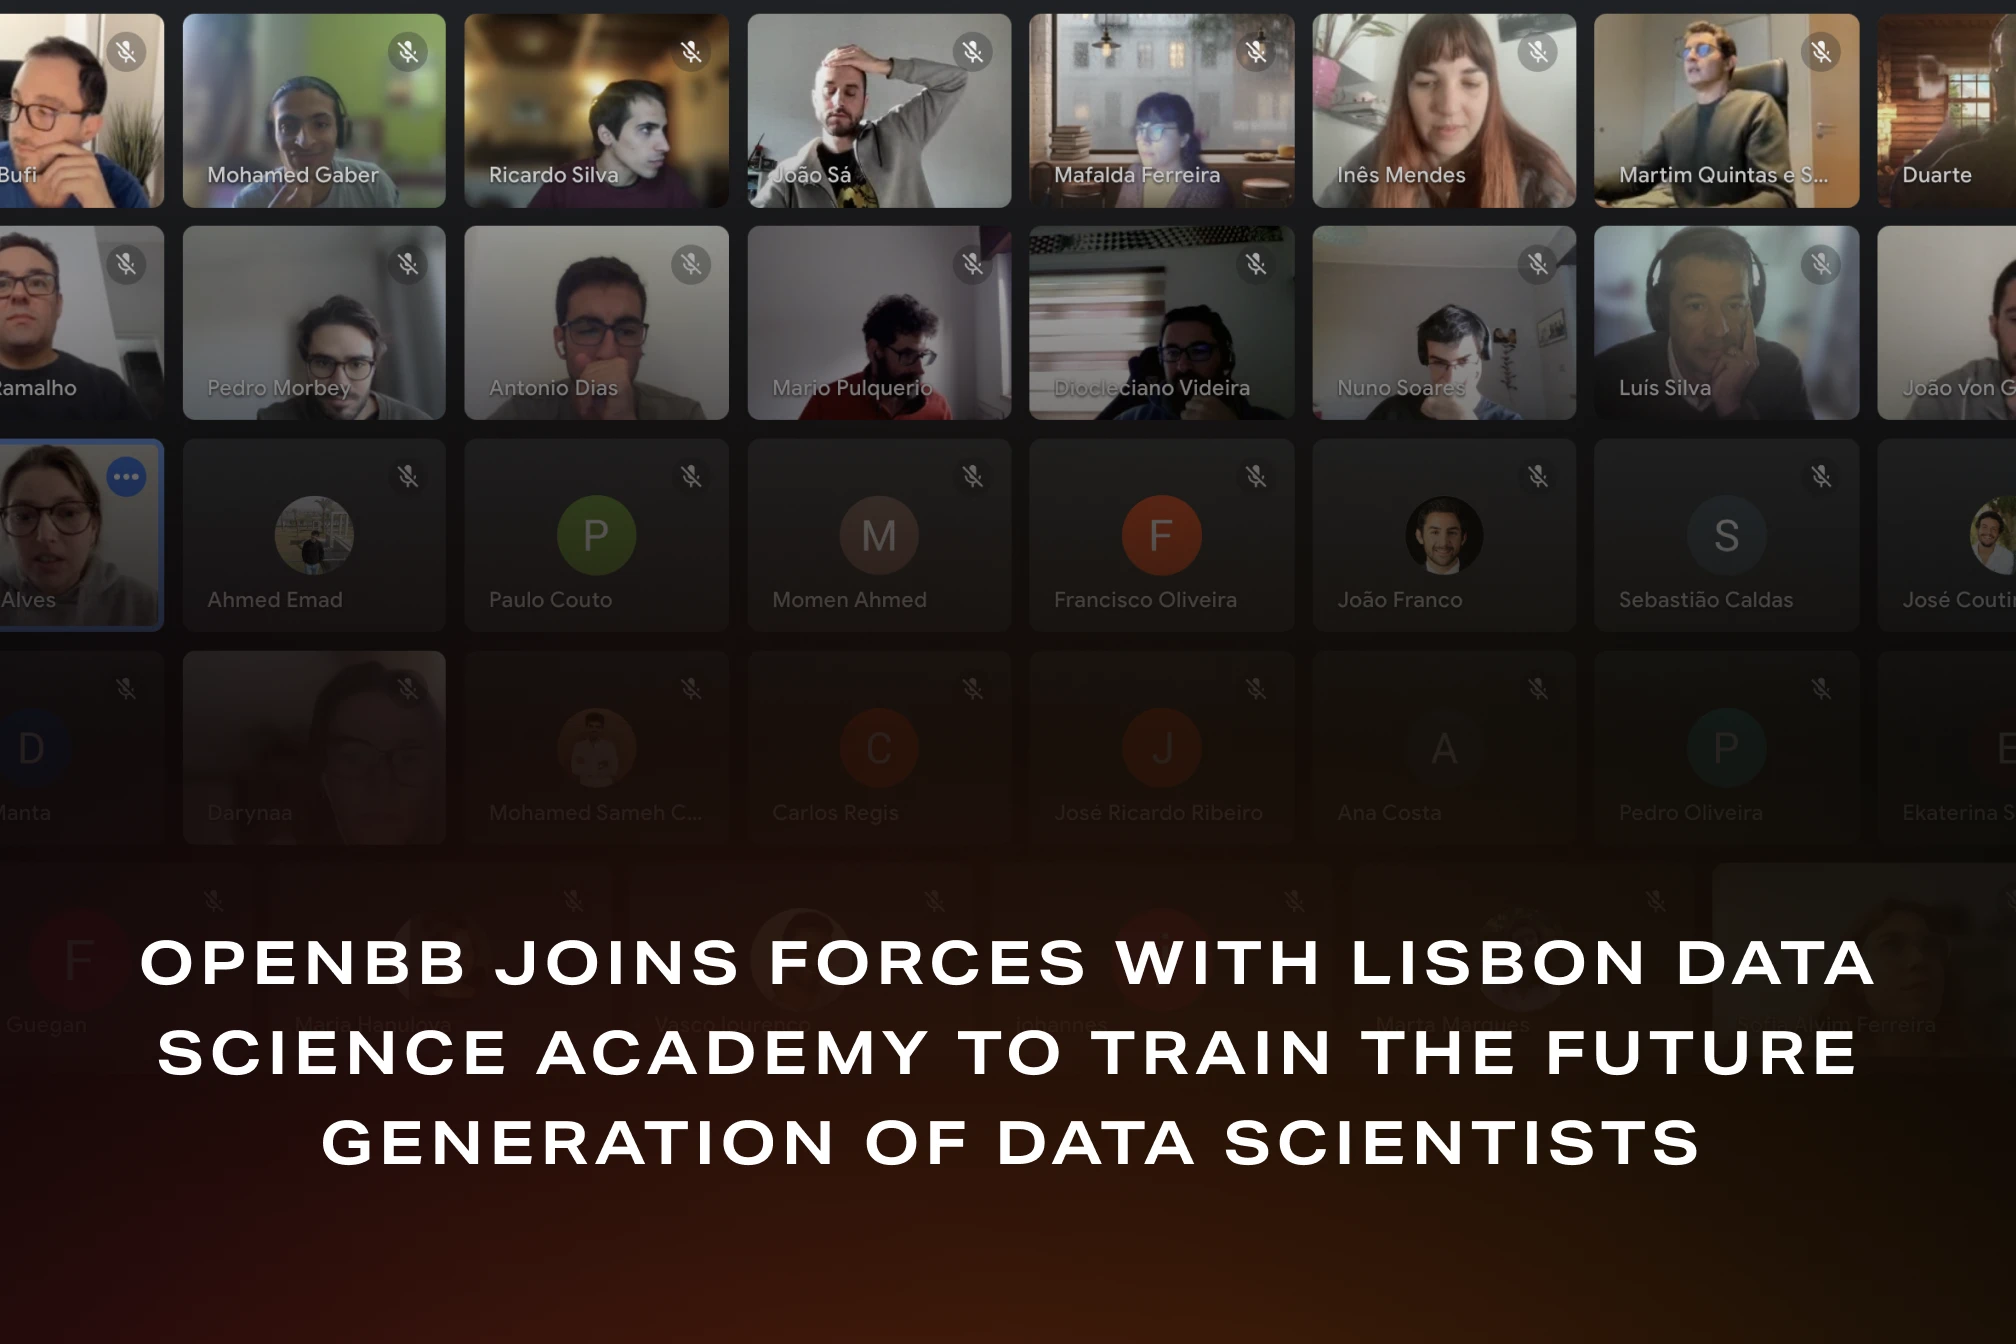 OpenBB joins forces with Lisbon Data Science Academy